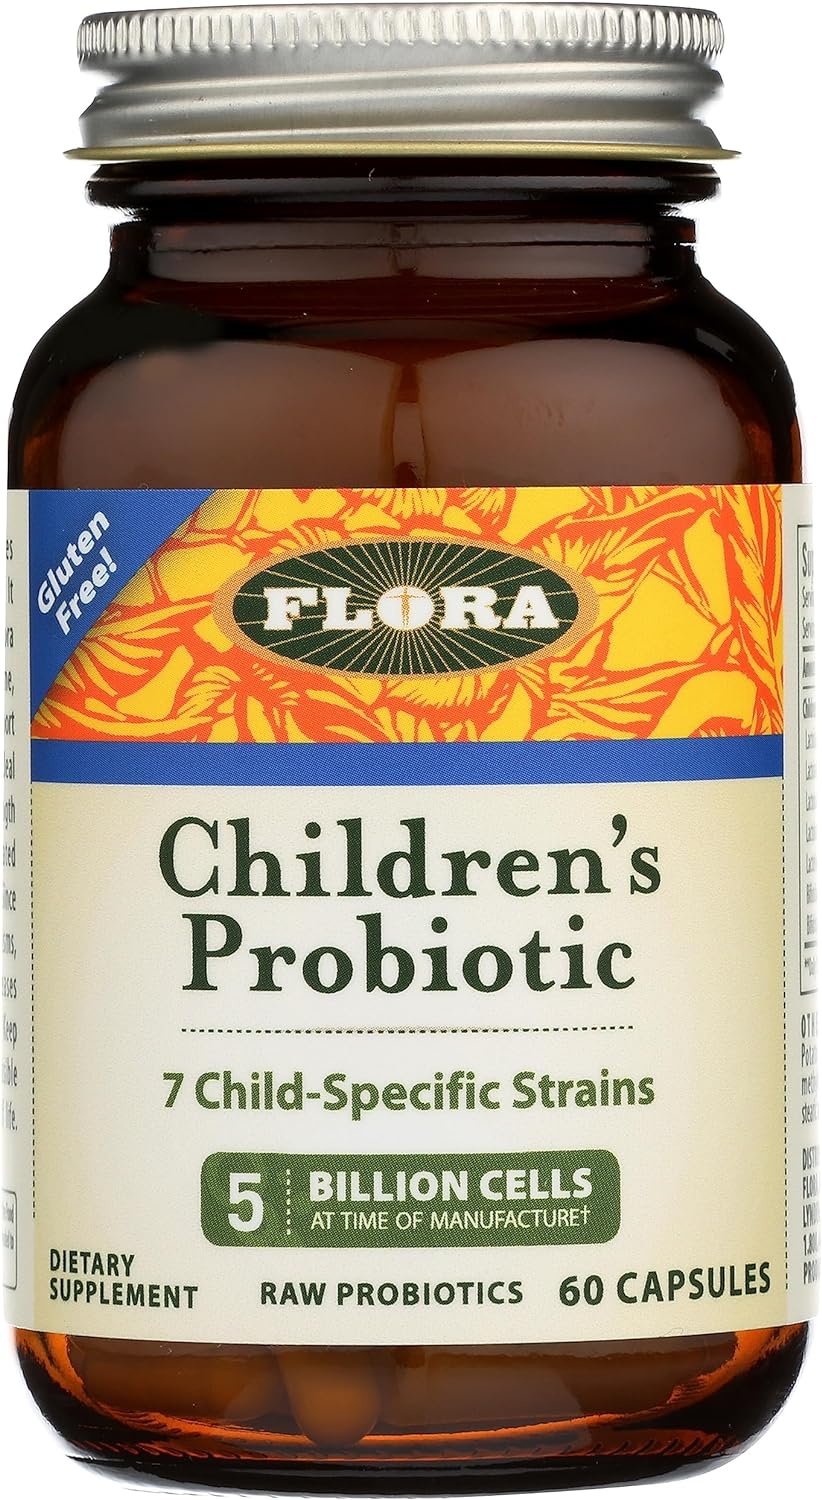 Flora - Udo's Choice Children's Probiotic Blend, with Seven Child-Specific Strains, 5 Billion Cells of Raw Probiotics, Formulated for Ages 5-15, Regain and Retain Gut Health, 60 Capsules